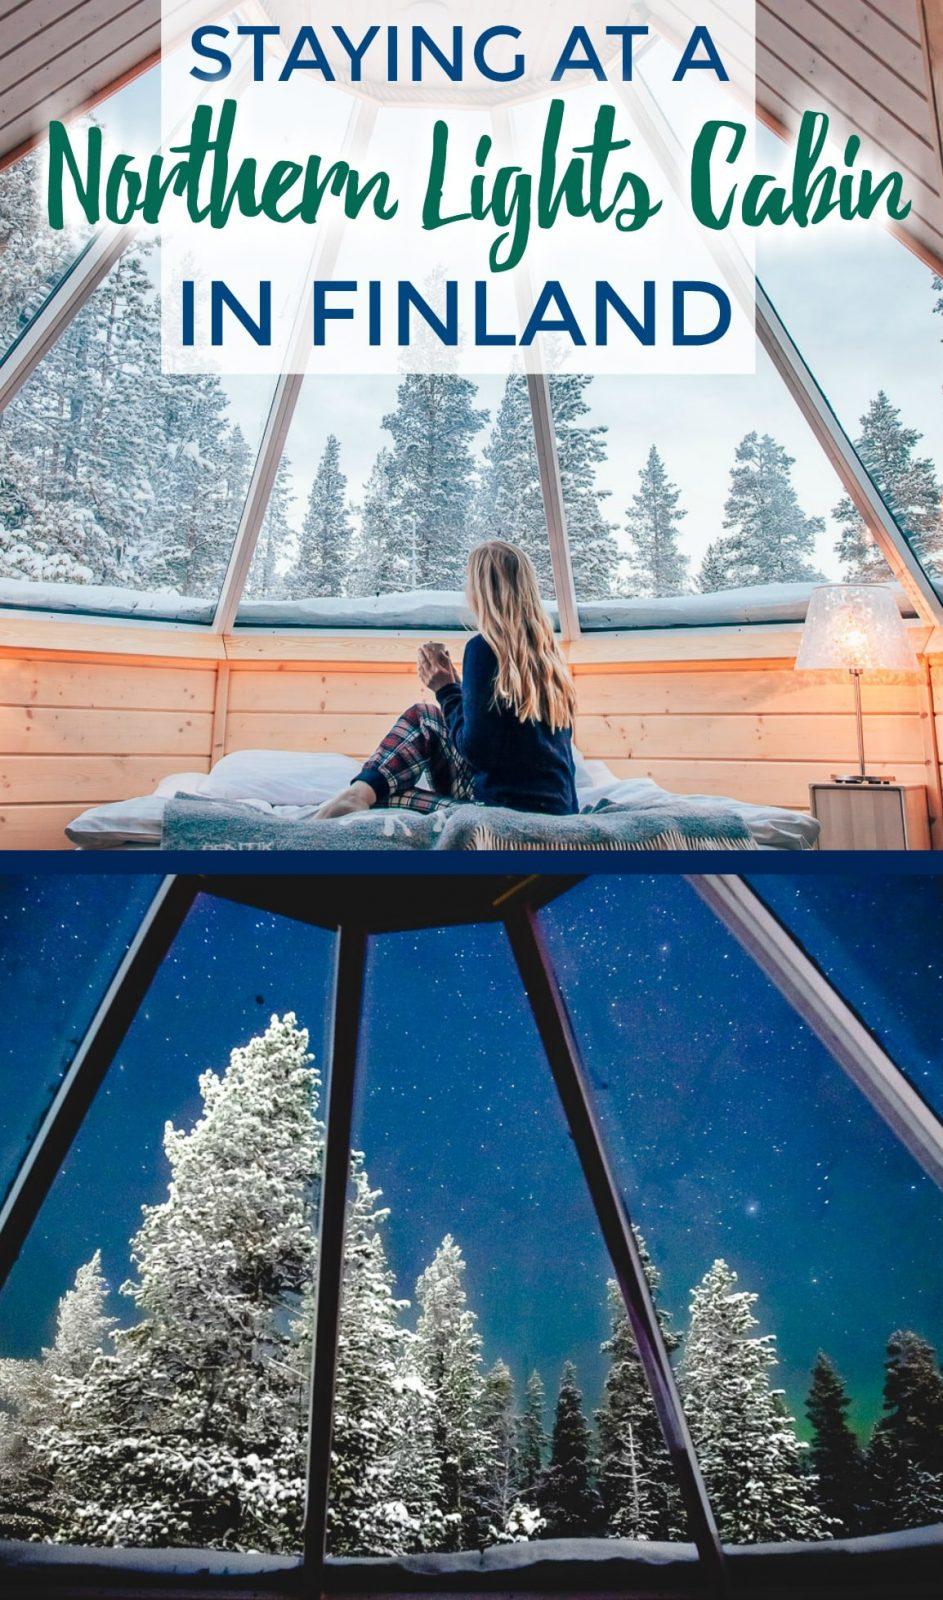 I've always dreamed of staying in a glass roofed Northern Lights cabin or glass igloo in Finland, and this January I finally did it! Click to read all the details on my time there, Northern Lights excursions, winter activities, and tips for the best time to visit.